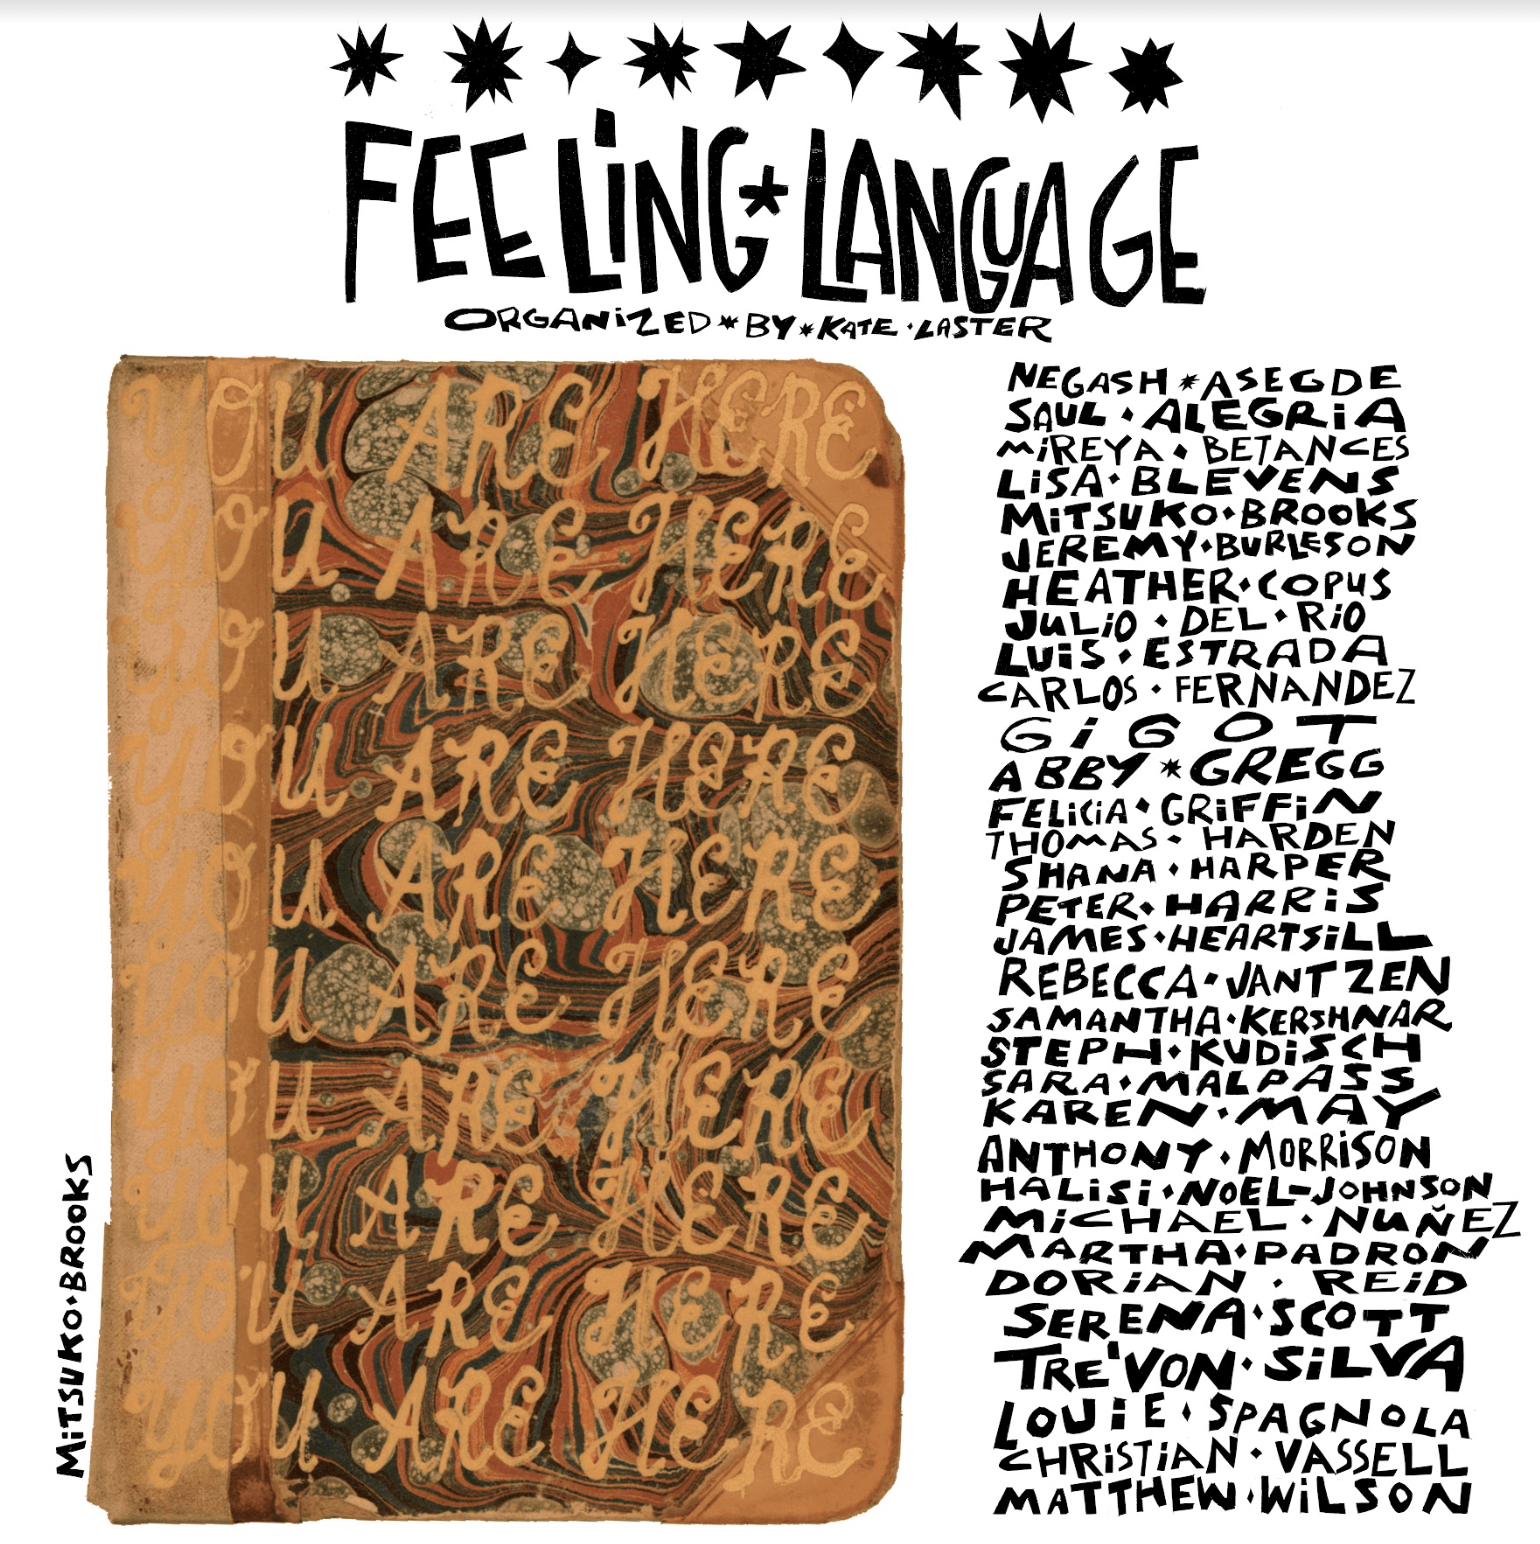 A graphic promoting an exhibition. Below a row of black cutout star shapes, centered at the top of the image, in exuberant black text that has a hand-cut feel, are the words “Feeling Language” in all caps. Below that in a smaller size, the words “organized by Kate Laster”. In the left half of the graphic, a page from a book with swirling patterns is covered with ten rows of the handwritten phrase “You Are Here,” hand written in a beige cursive font in all caps. The name “Mitsuko Brooks” appears to the left. In the same font, a column on the right lists the artists participating in the exhibition. Each word is separated by a diamond or a star shape